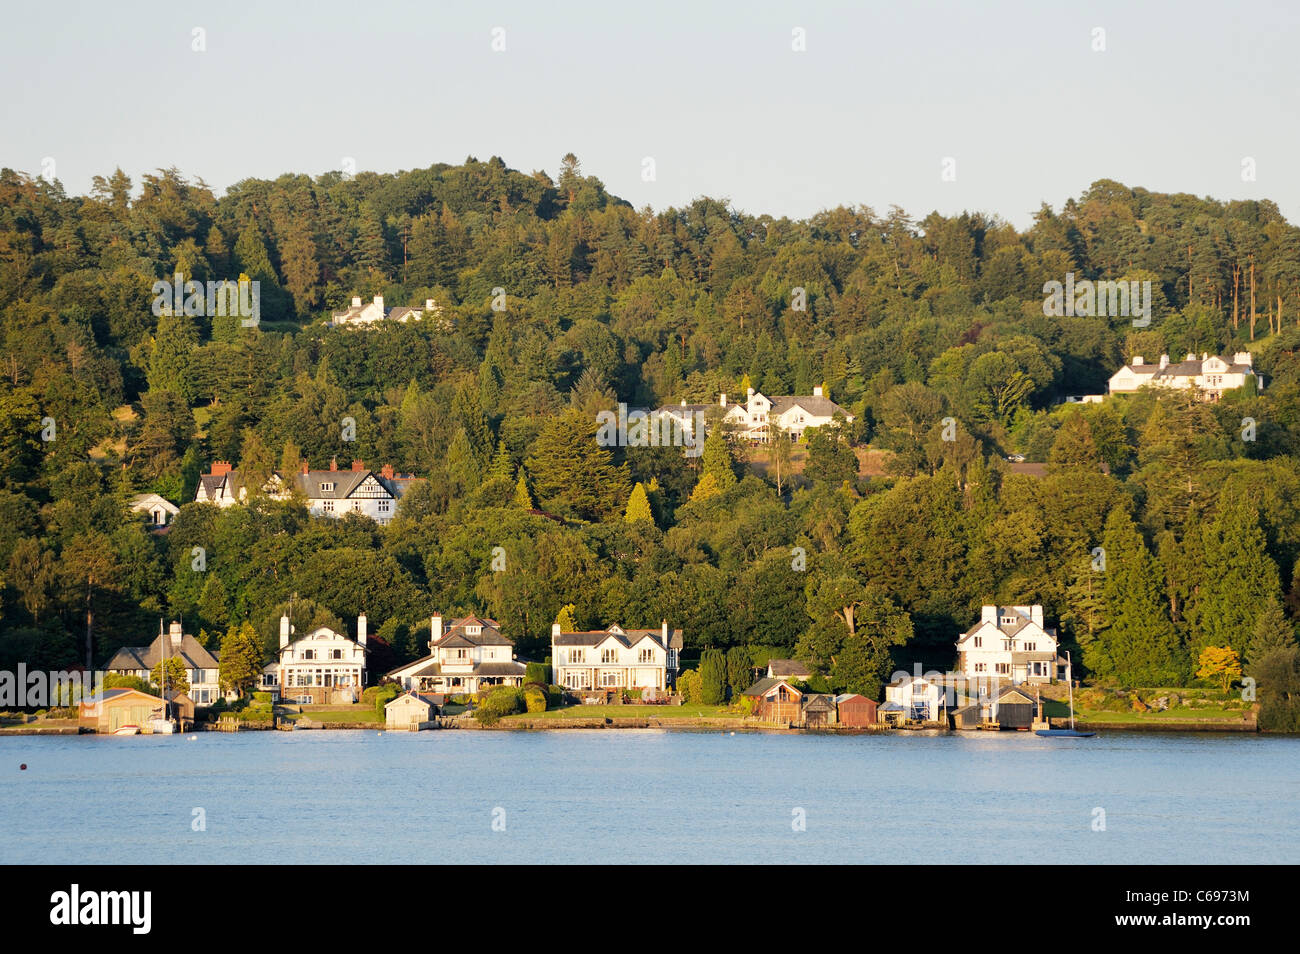 Windermere, Lake District National Park, Cumbria, England. Lake shore villas private houses near Ferry Nab on east shore. Summer Stock Photo